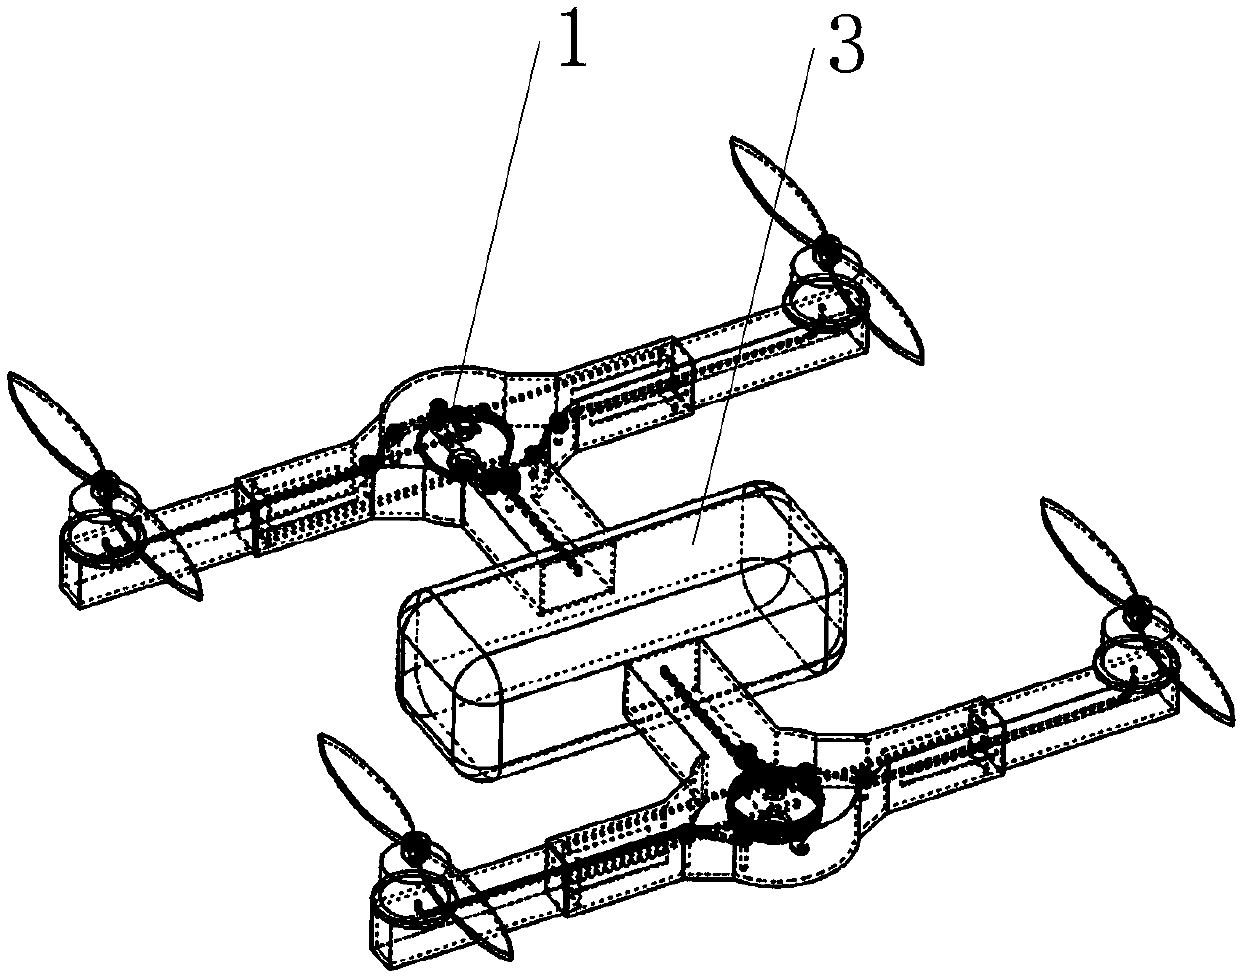 Vehicle arm retraction type UAV (unmanned aerial vehicle) capable of winding cable